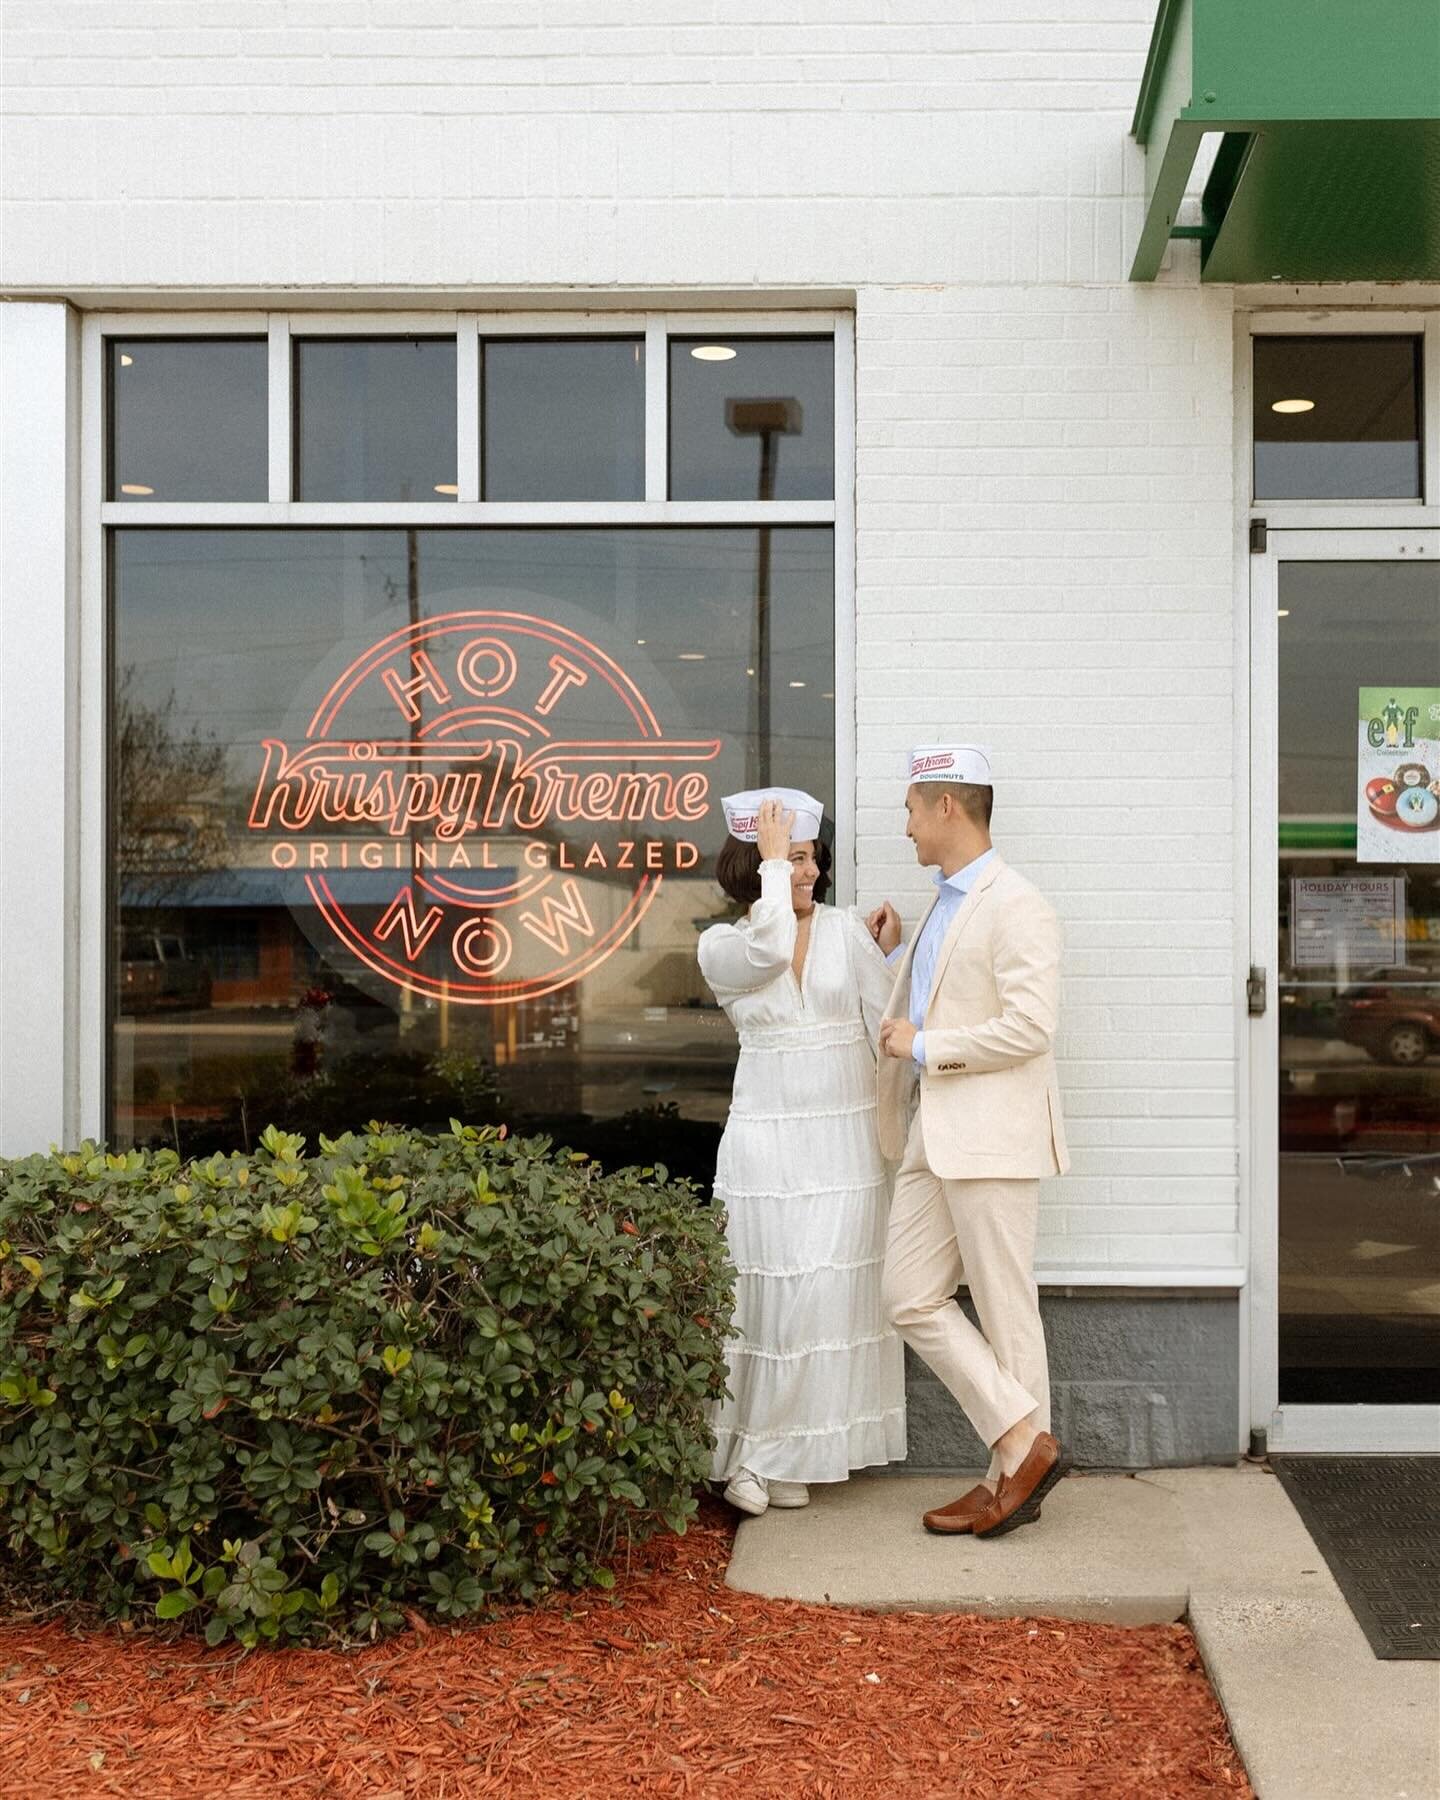 When Krispy Kreme was a key component of your dating relationship- you go back for engagement pics 💛🍩

&bull;
&bull;
&bull;
&bull;
#krispykreme #pensacolaengagementphotographer #pensacolaphotographer #gulfcoastphotographer #emeralcoastphotographer 